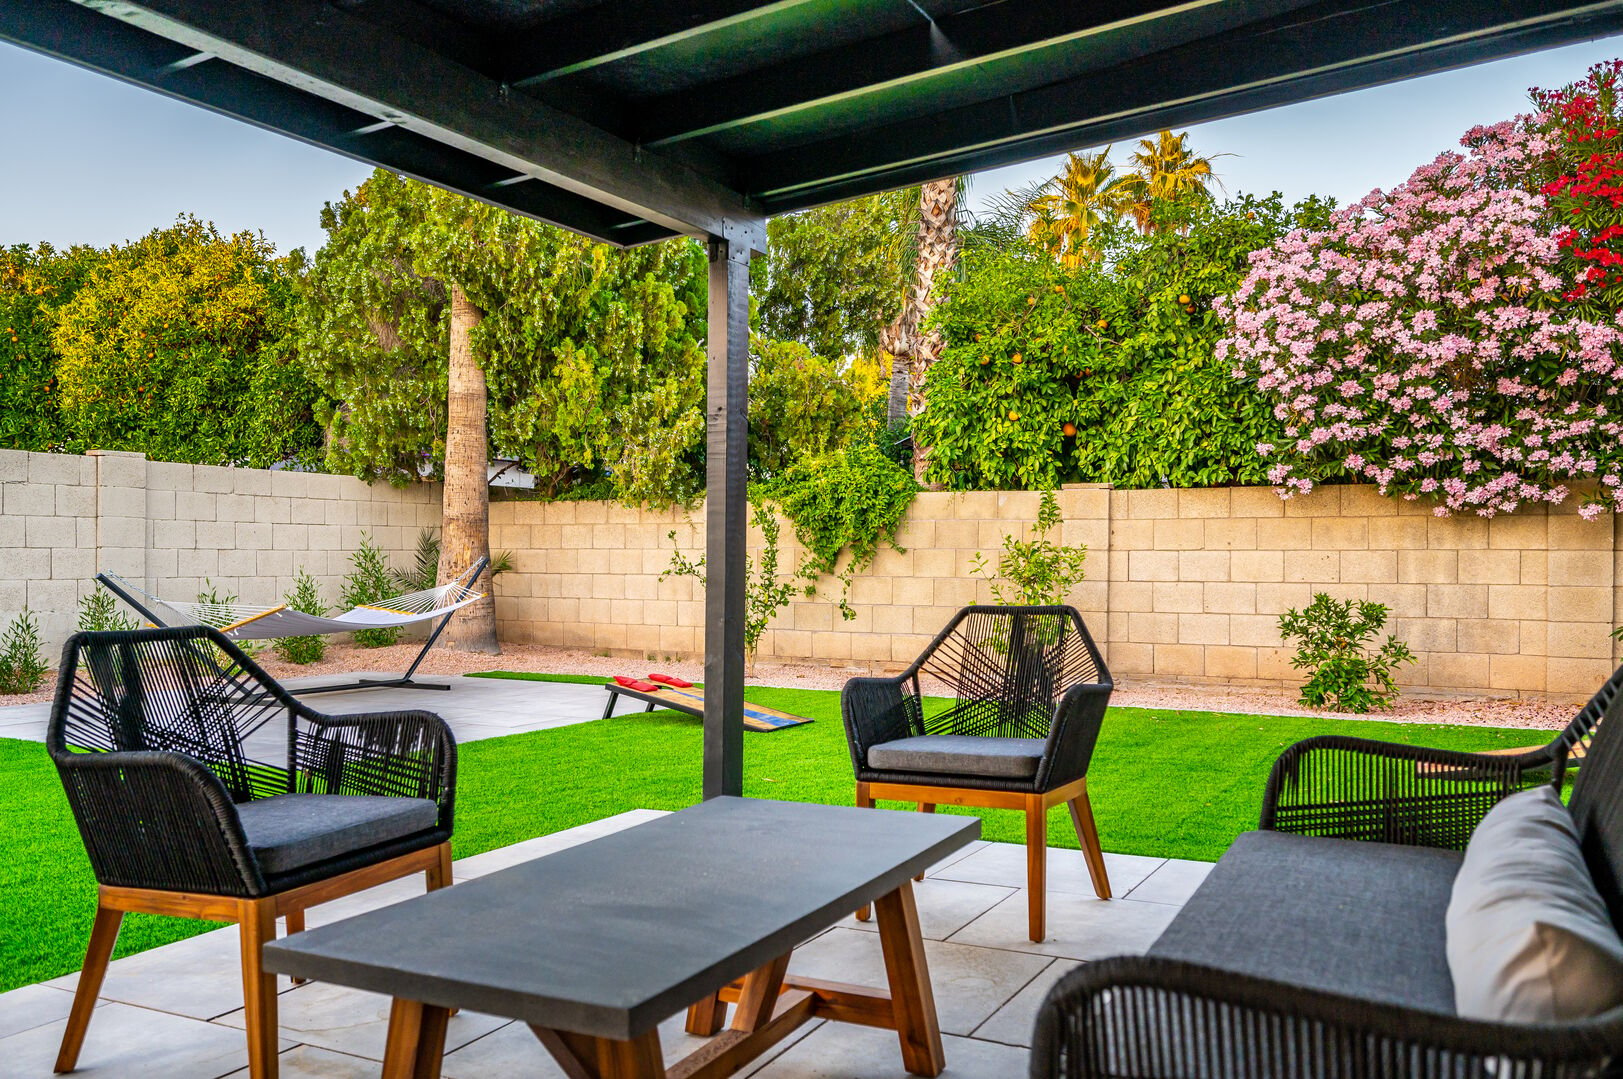 Sit and relax with the outdoor living areas.